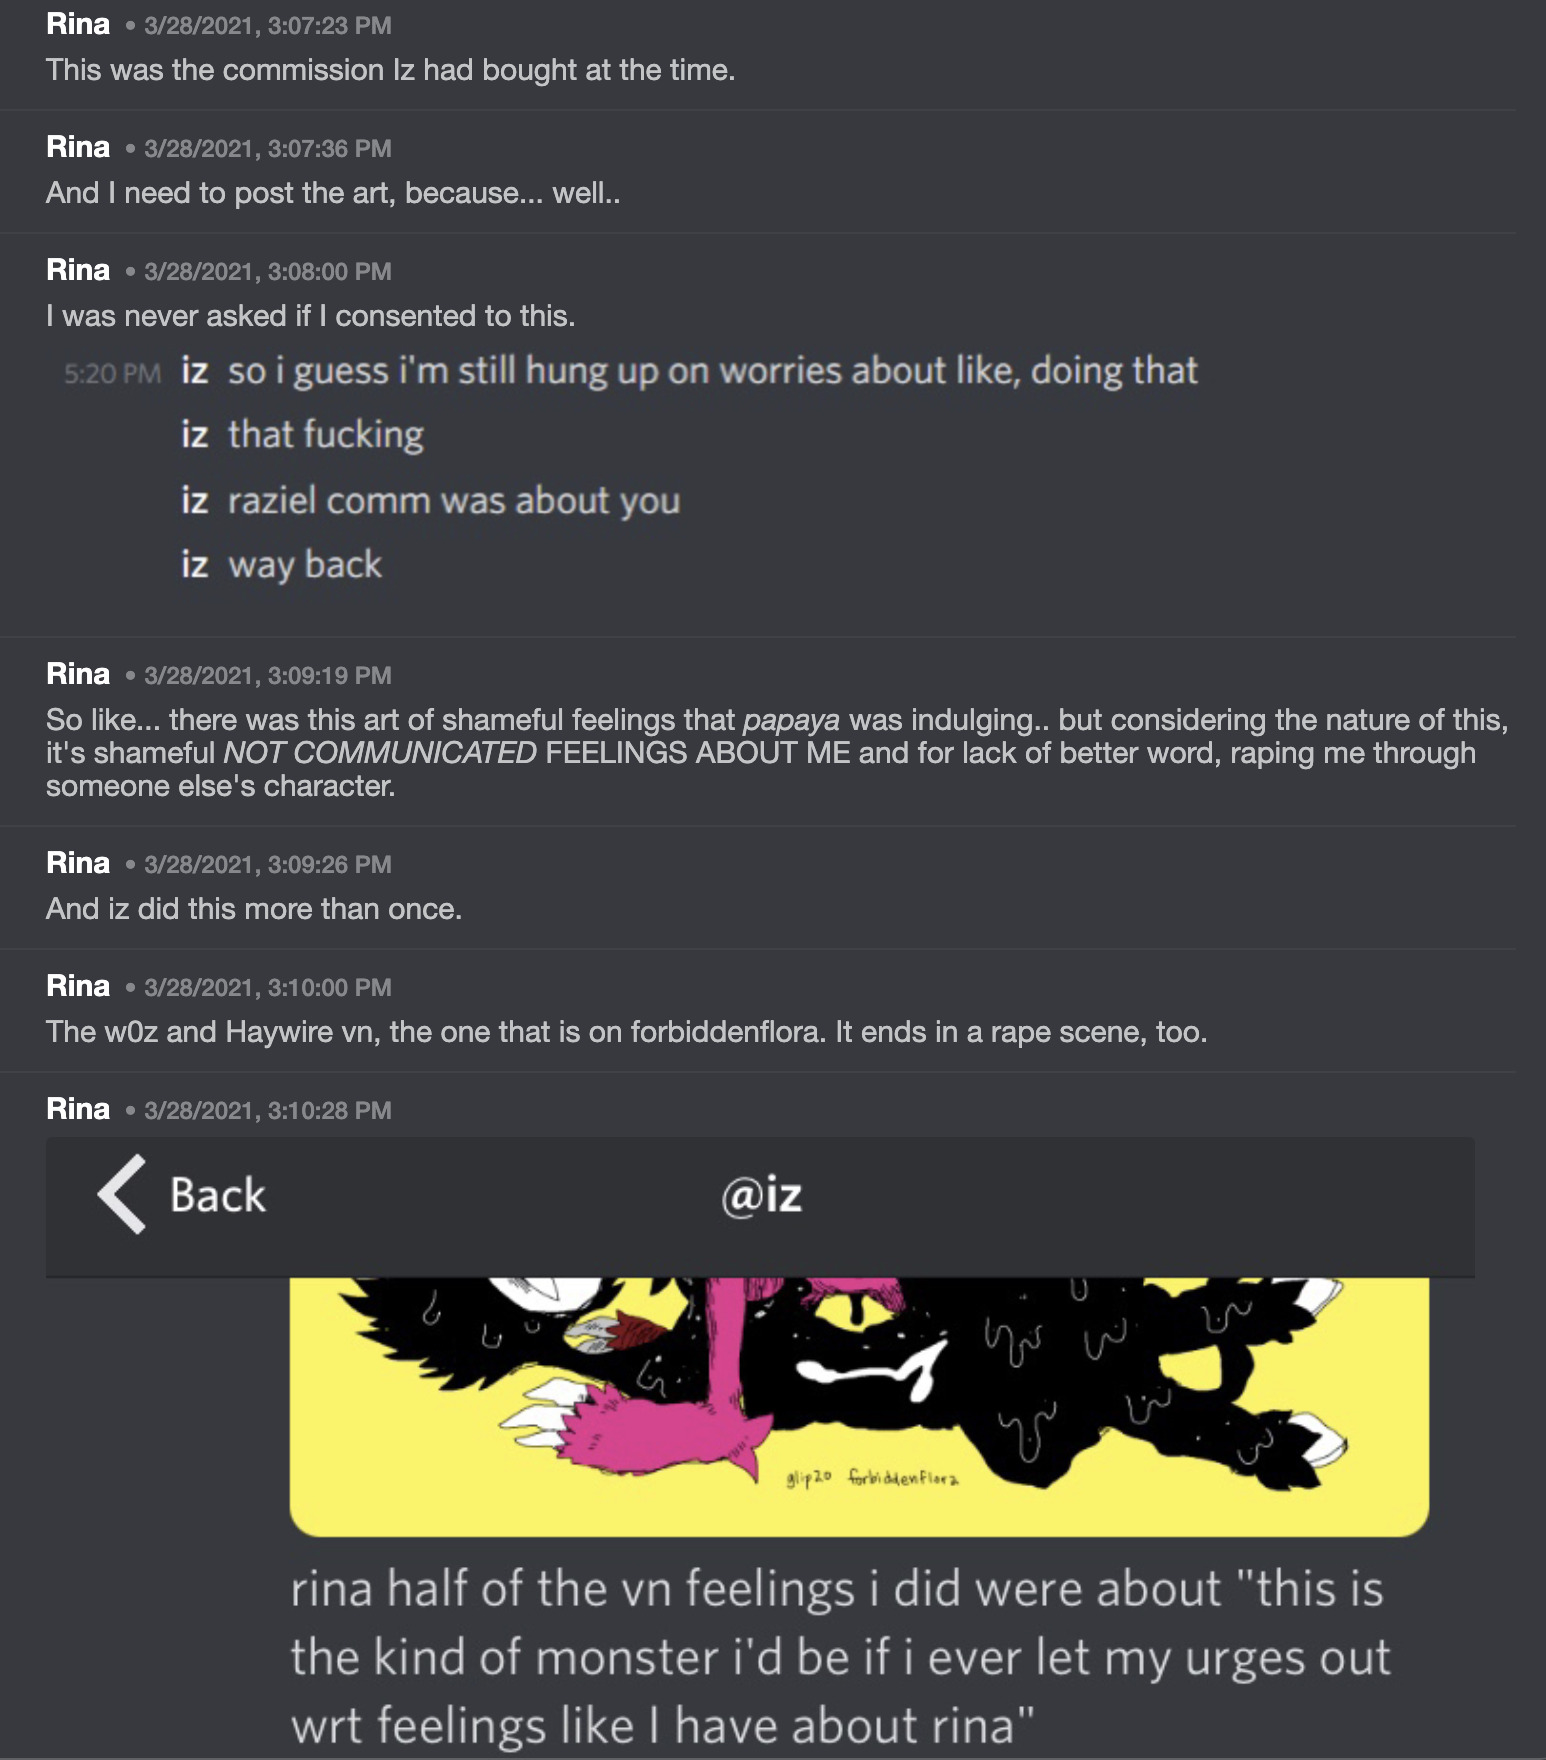 Rina on Discord says: 'This was the commission Iz had bought at the time. And I need to post the art, because... well.. I was never asked if I consented to this.' Rina shares a screenshot of Iz saying: 'so I guess I'm still hung up on worries about like, doing that. That fucking. Raziel comm was about you. way back.'  Rina continues on discord: 'So like... there was this art of shameful feelings that papaya was indulging.. but considering the nature of this, it's shameful NOT COMMUNICATED FEELINGS ABOUT ME and for lack of better word, raping me through someone else's character. And iz did this more than once. The w0z and Haywire vn, the one that is on forbiddenflora. It ends in a rape scene, too.' Rina then shares a screenshot of a DM from Iz showing the cropped Raziel commission and the message 'rina half the vn feelings I did were about ''this is the kind of monster i'd be if I ever let my urges out wrt feelings like I have about rina'''